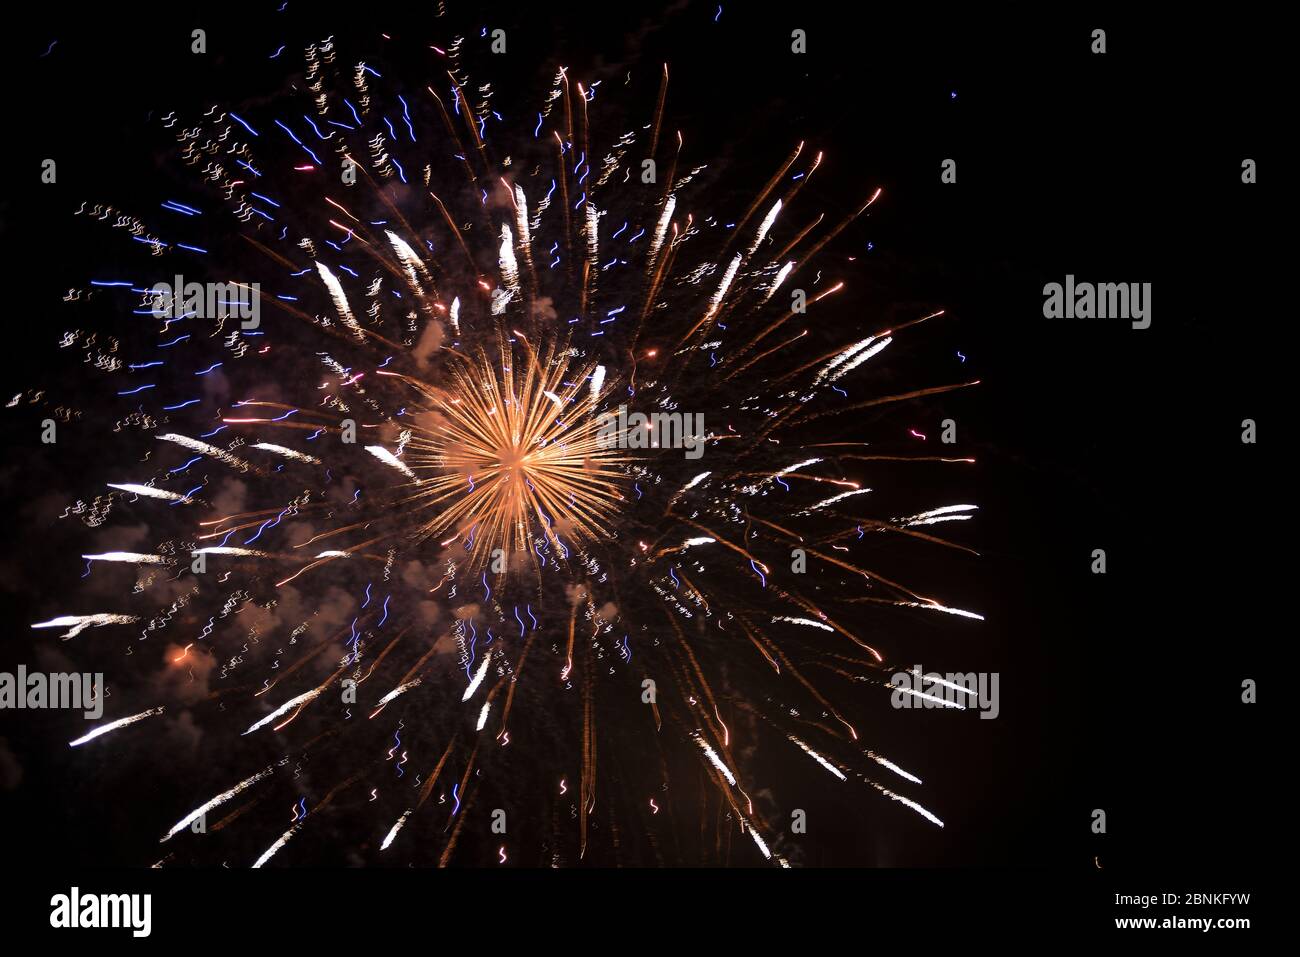 Colorful fireworks over dark sky, displayed during a celebration Stock Photo